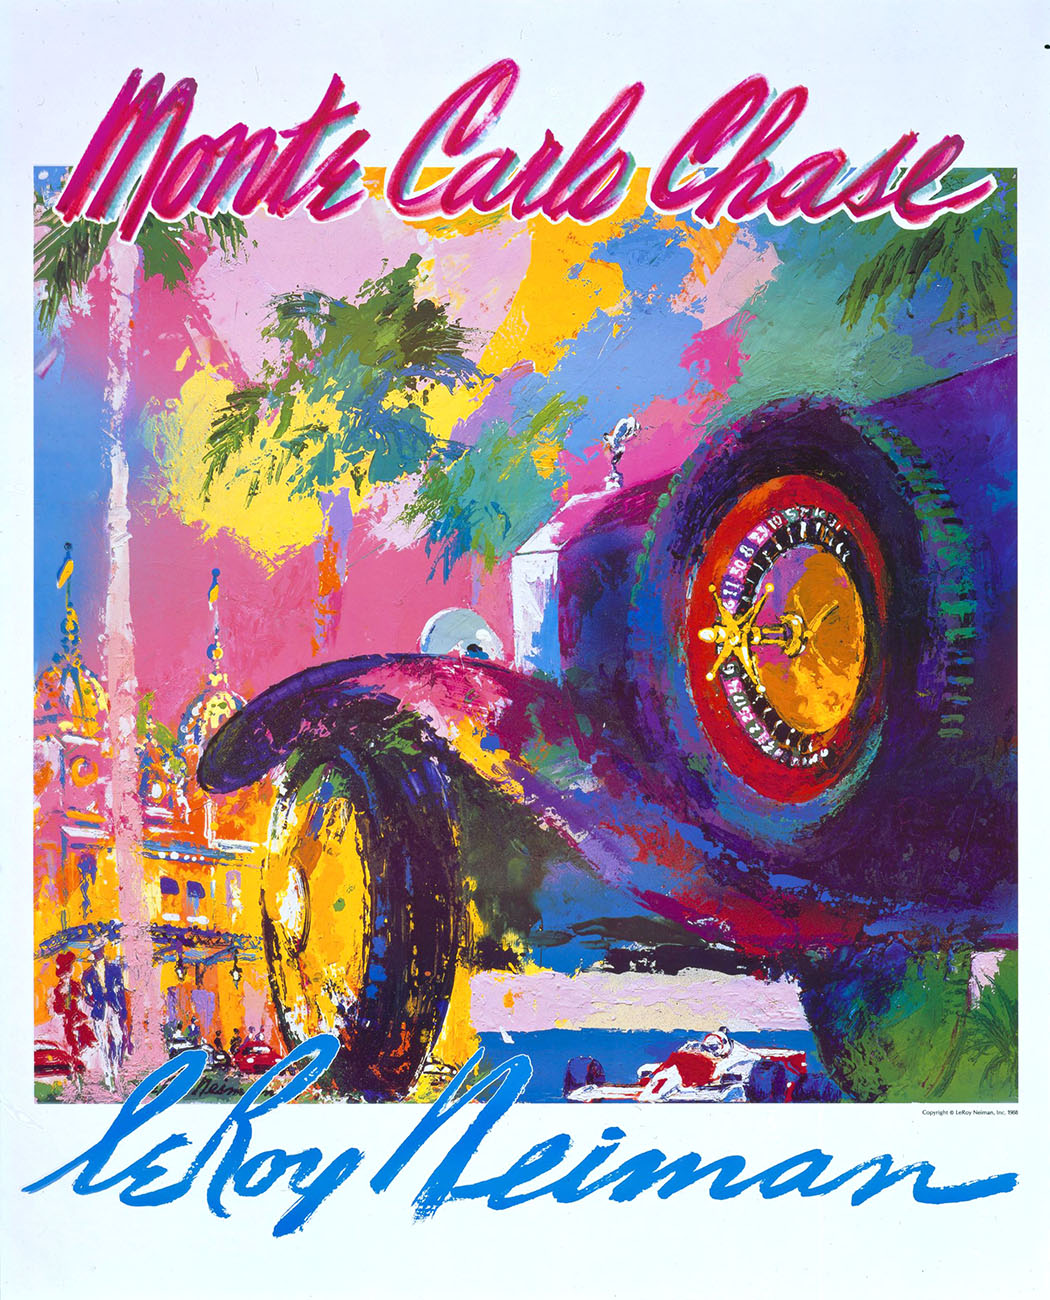 Monte Carlo Chase poster